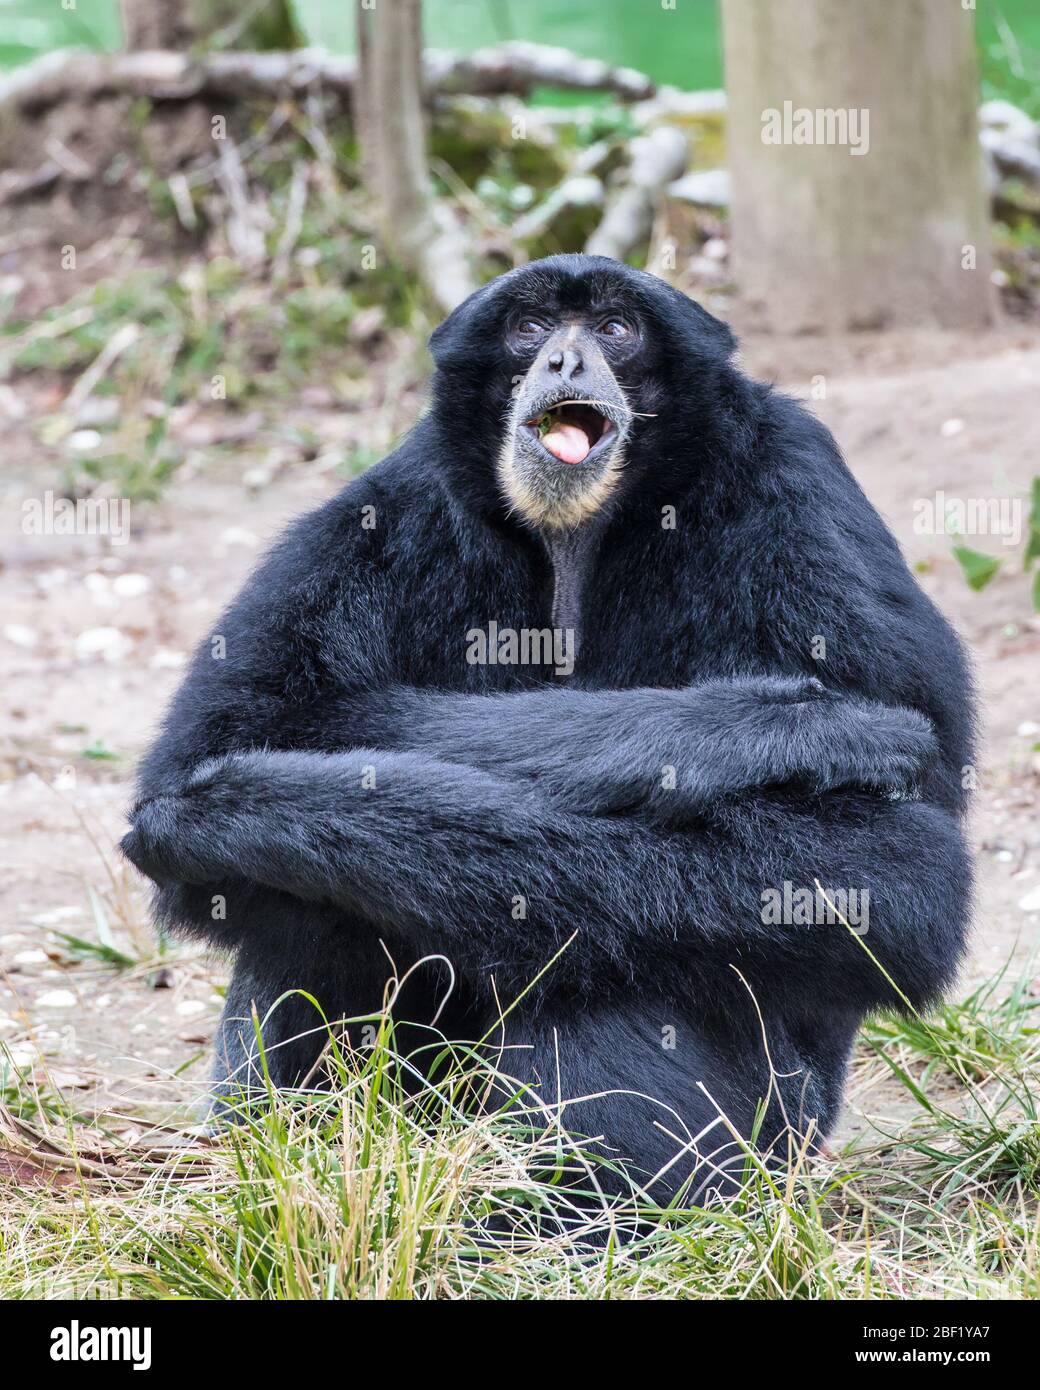 One Siamang monkey sitting with arms crossed chewing on a twig. Stock Photo